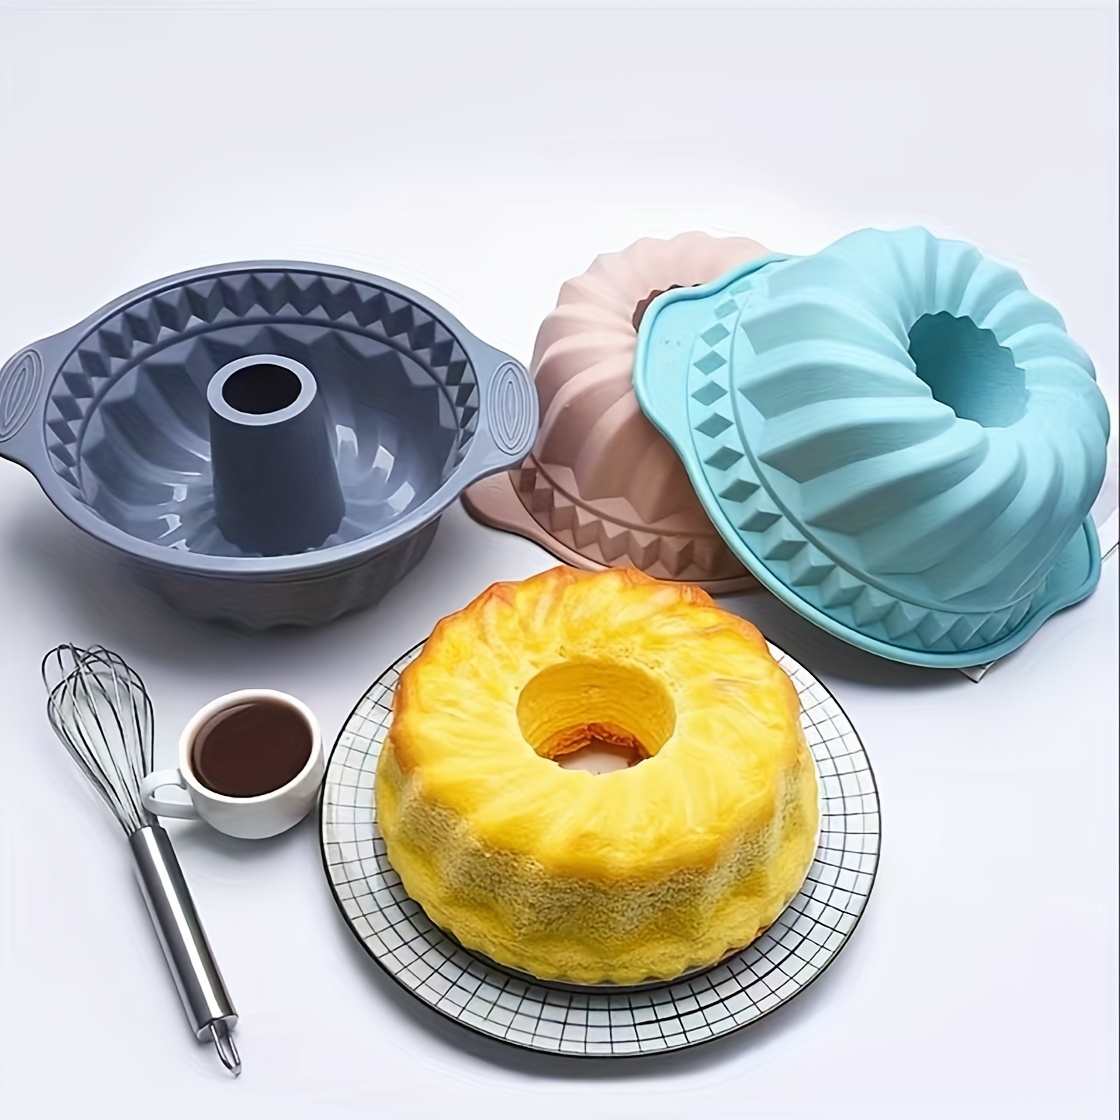 Big Bundt Cake Pan Silicone Mold for Baking Desserts Form Silikon Bread  Baking Accessories Oven Baking Trays Sugarcraft Tools